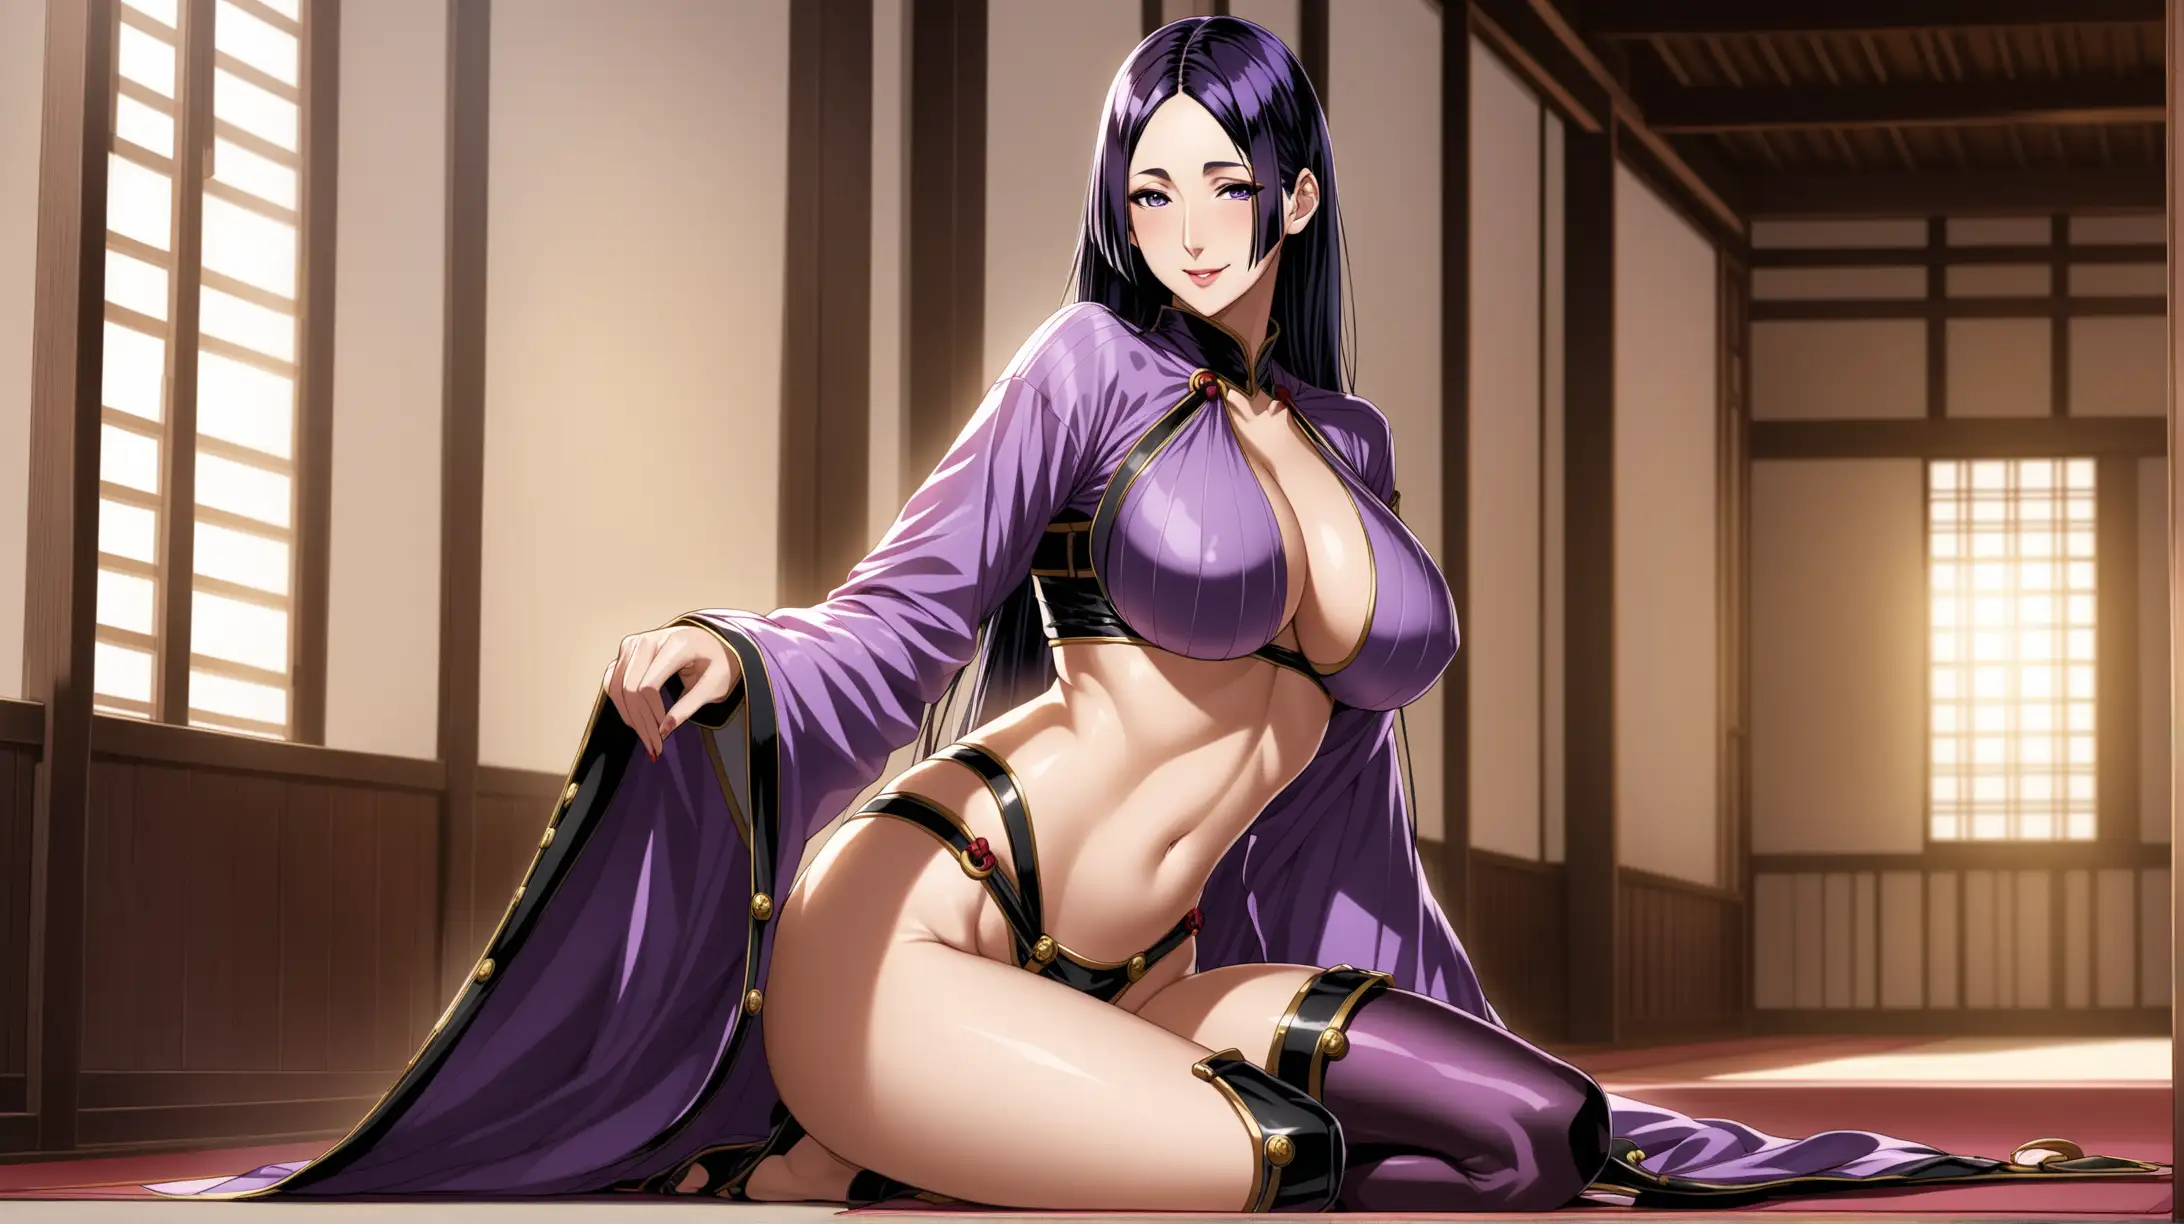 Draw the character Minamoto no Raikou, high quality, natural lighting, long shot, indoors, in a seductive pose, wearing an edgy fashion outfit, smiling at the viewer